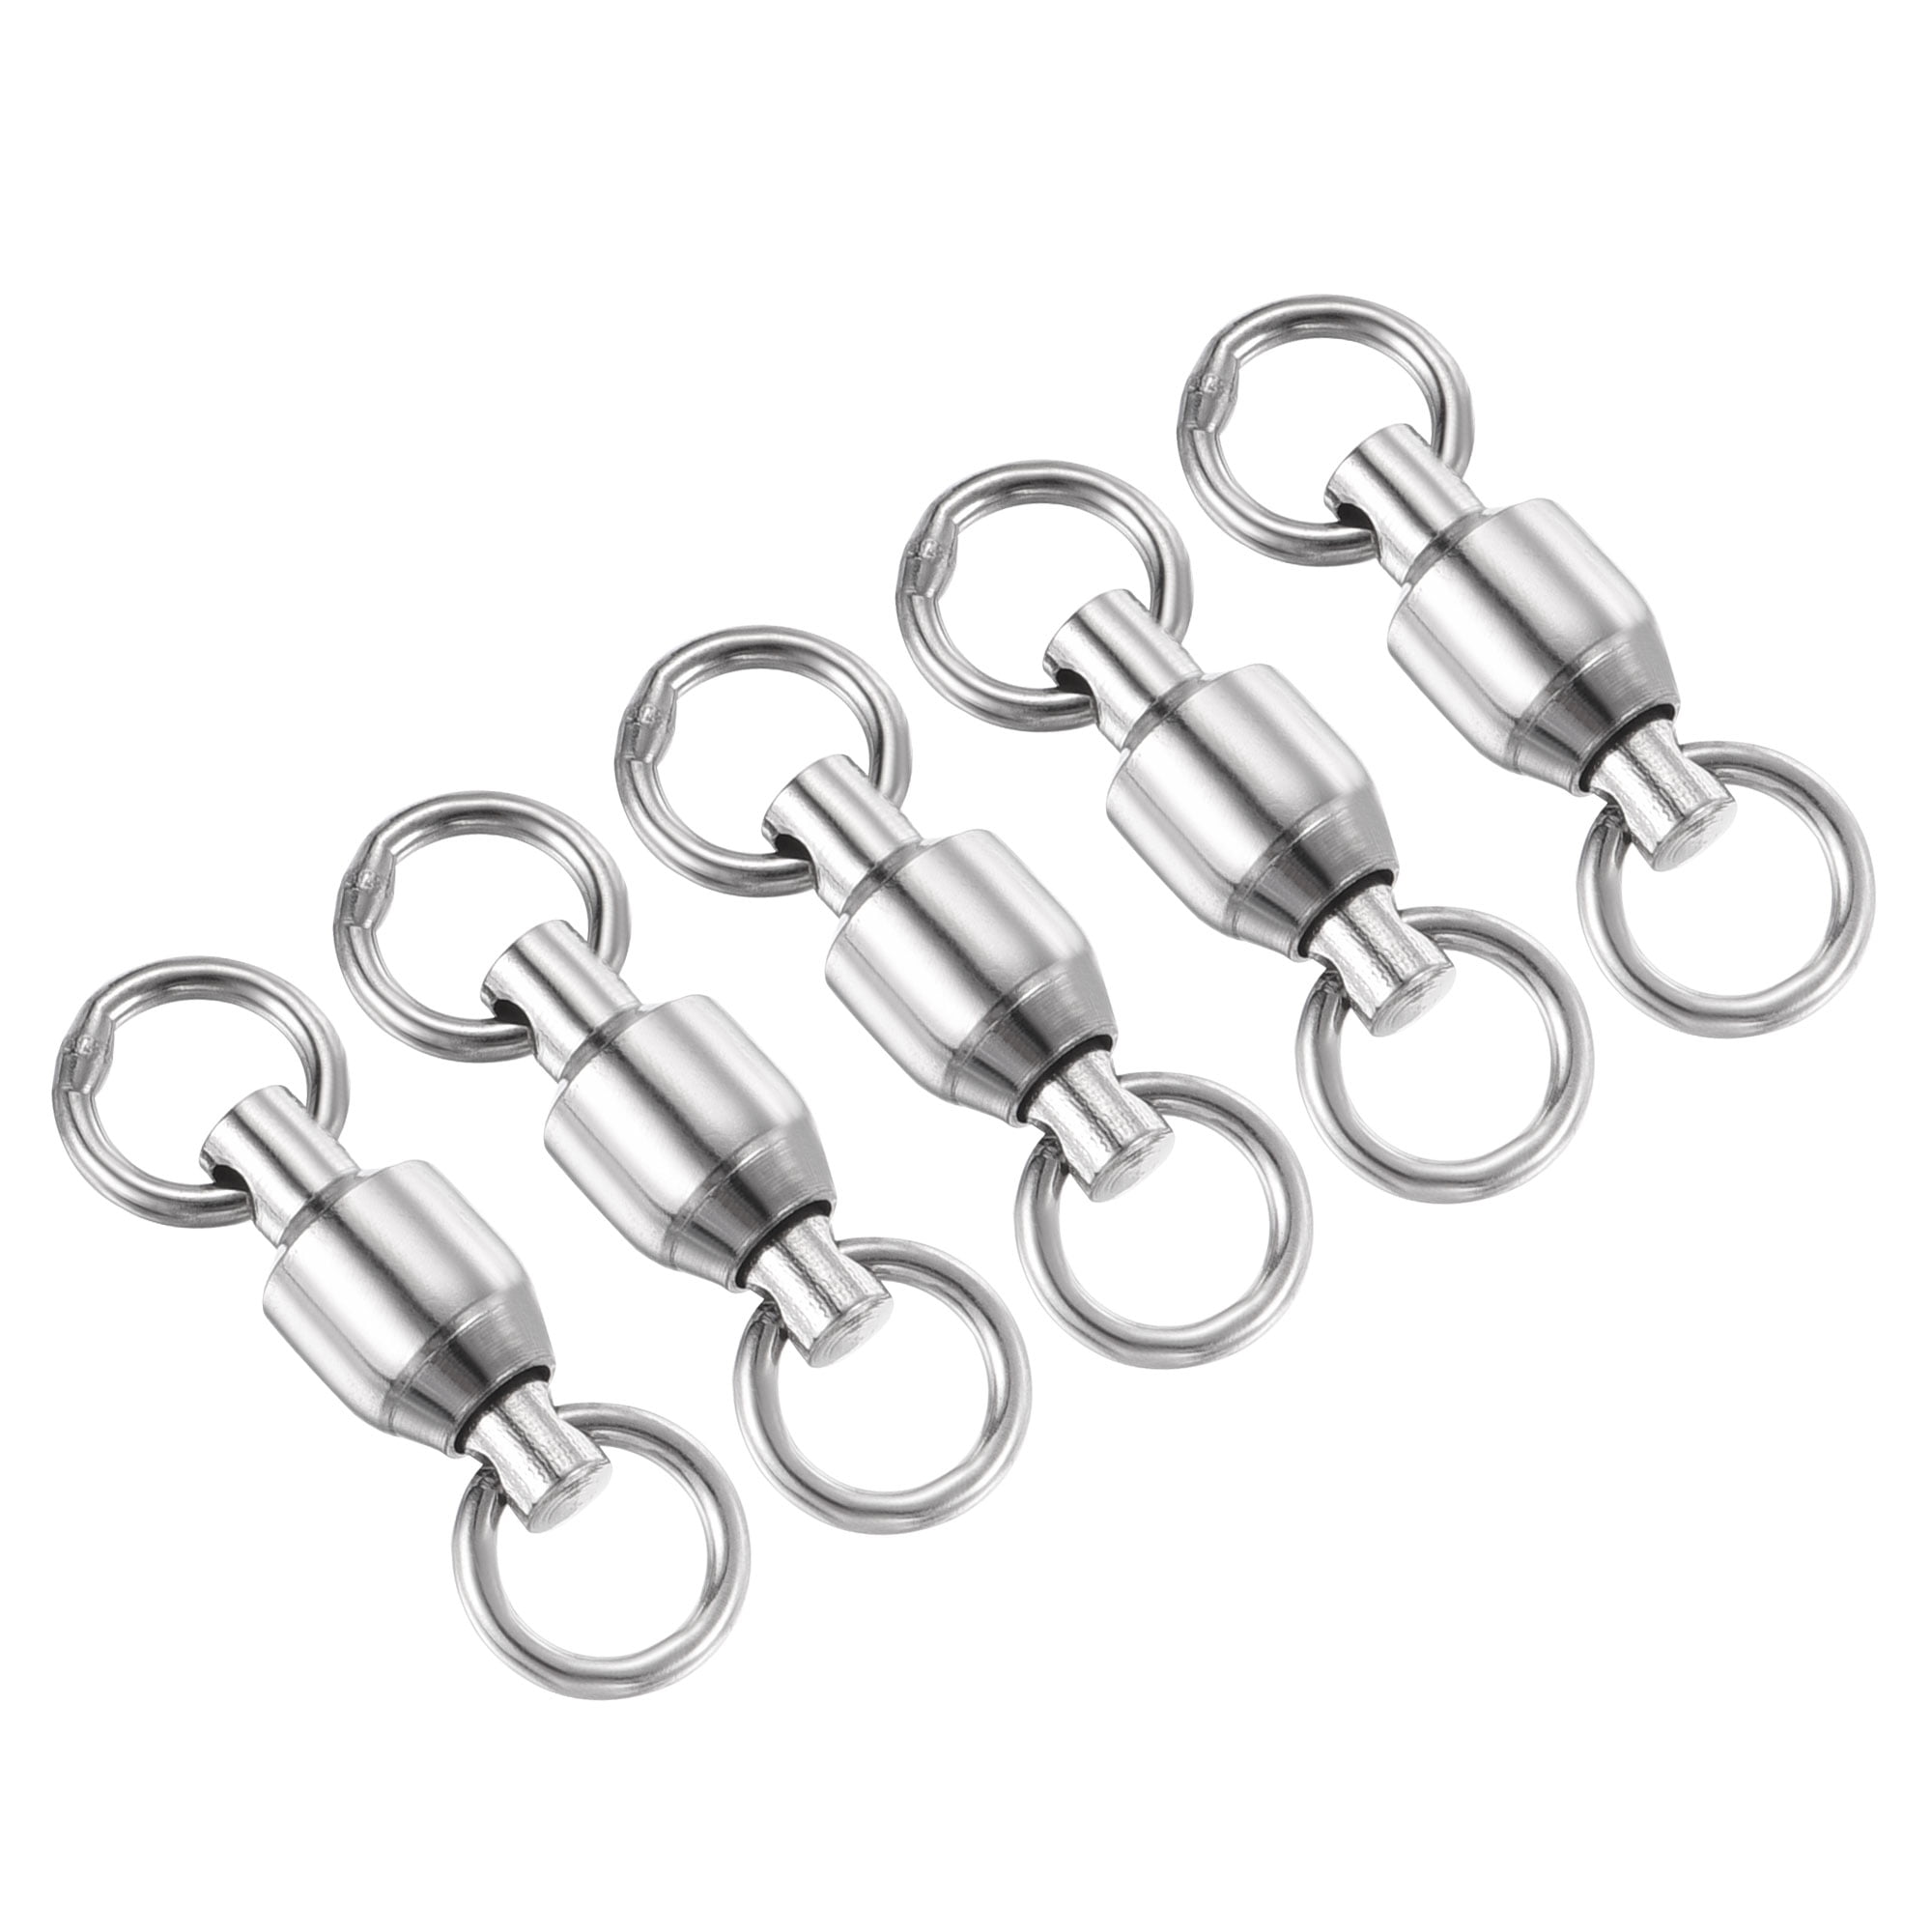 Uxcell 134LBS Stainless Steel Ball Bearing Swivel for Saltwater